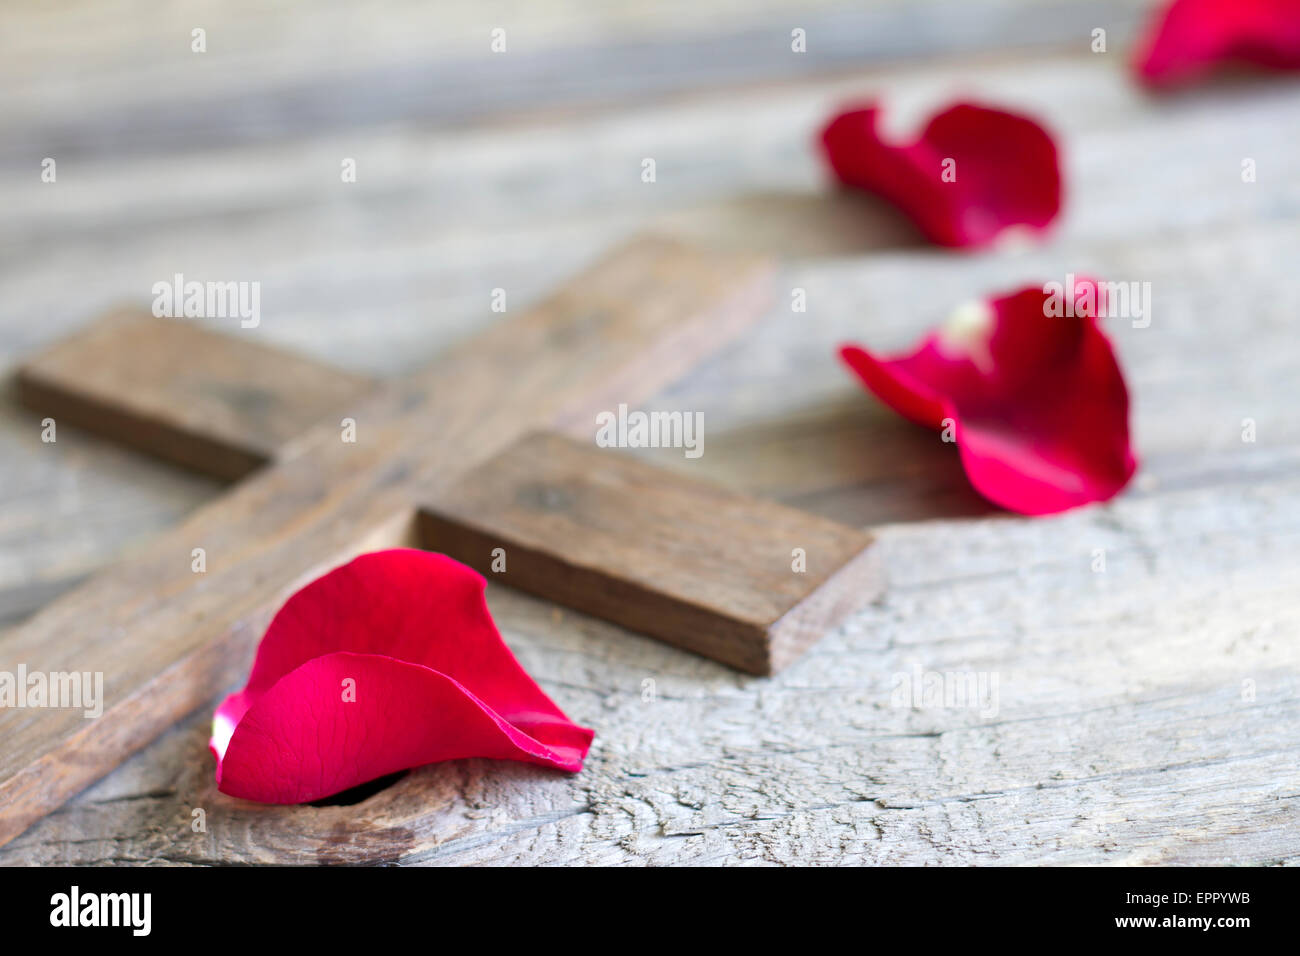 Cross and rose religion sign symbol abstract concept Stock Photo